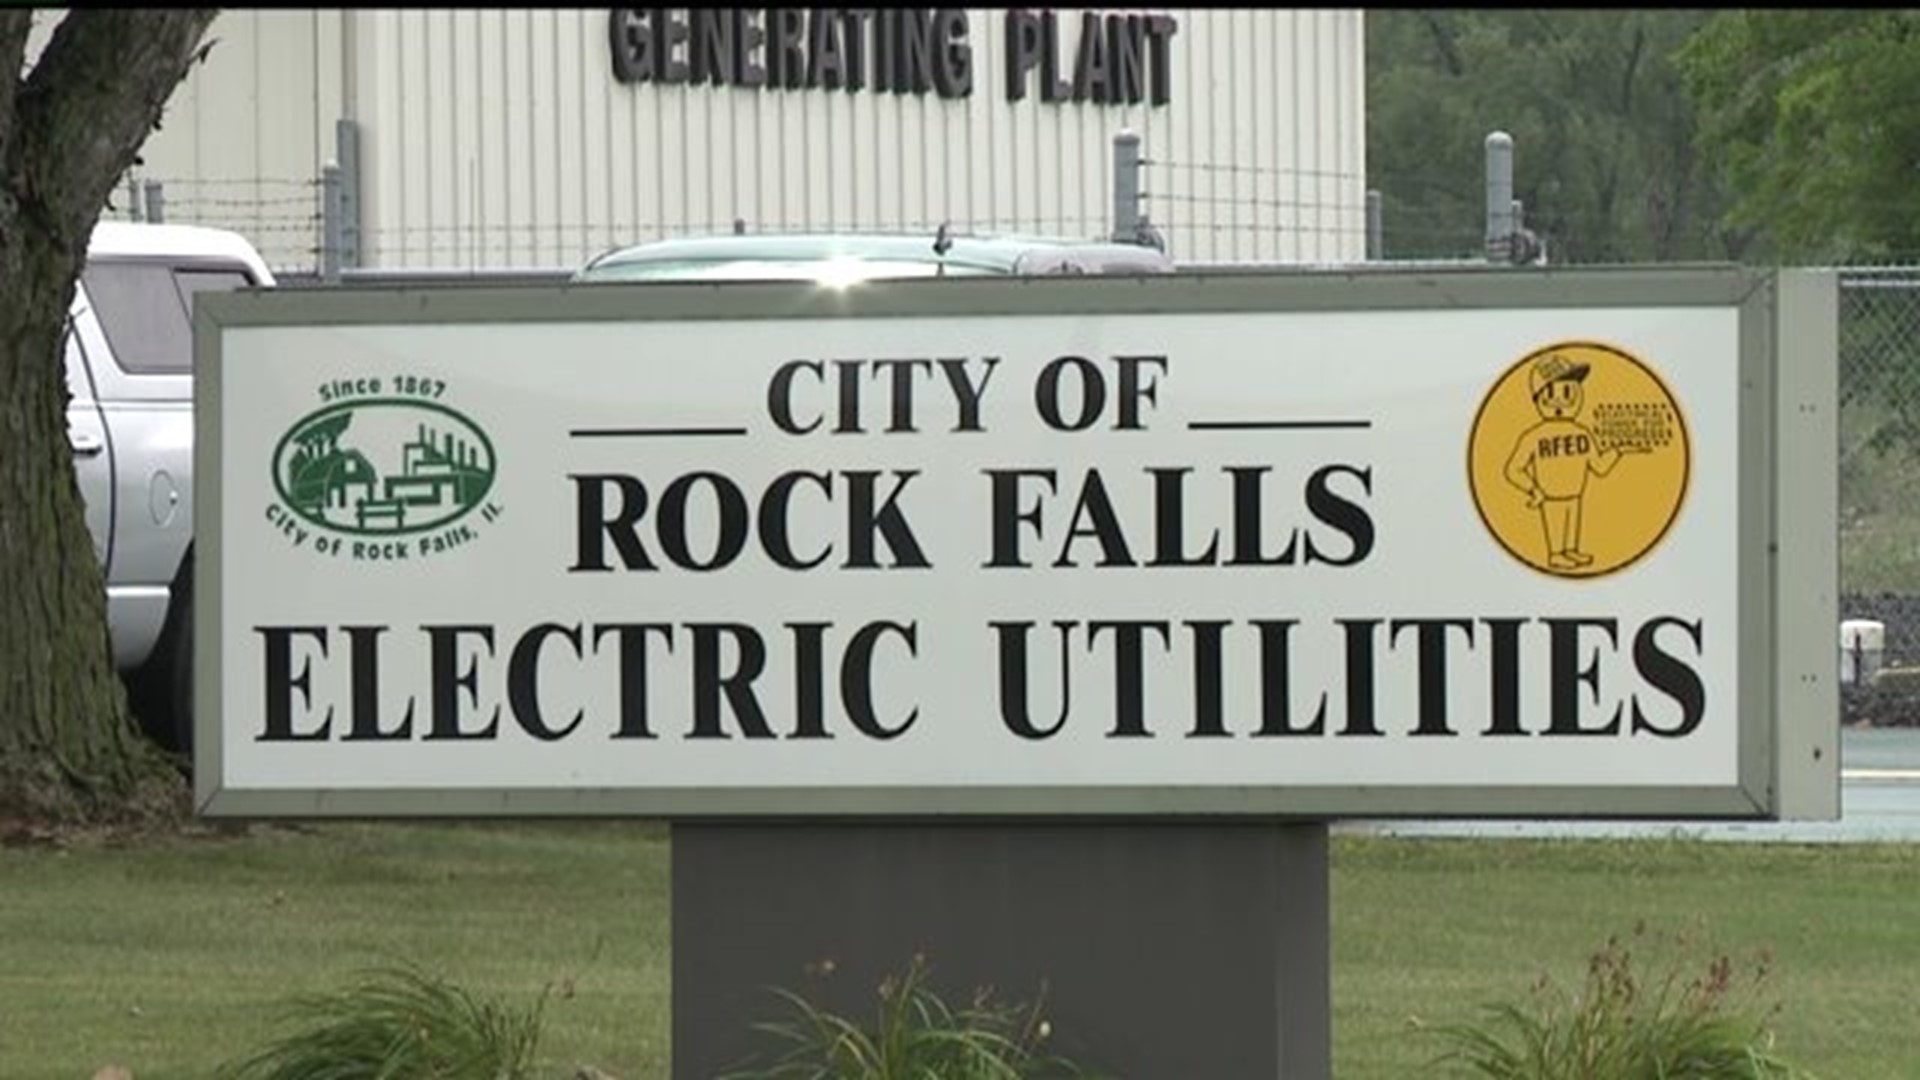 Man intrudes Rock Falls home, claims to be city employee